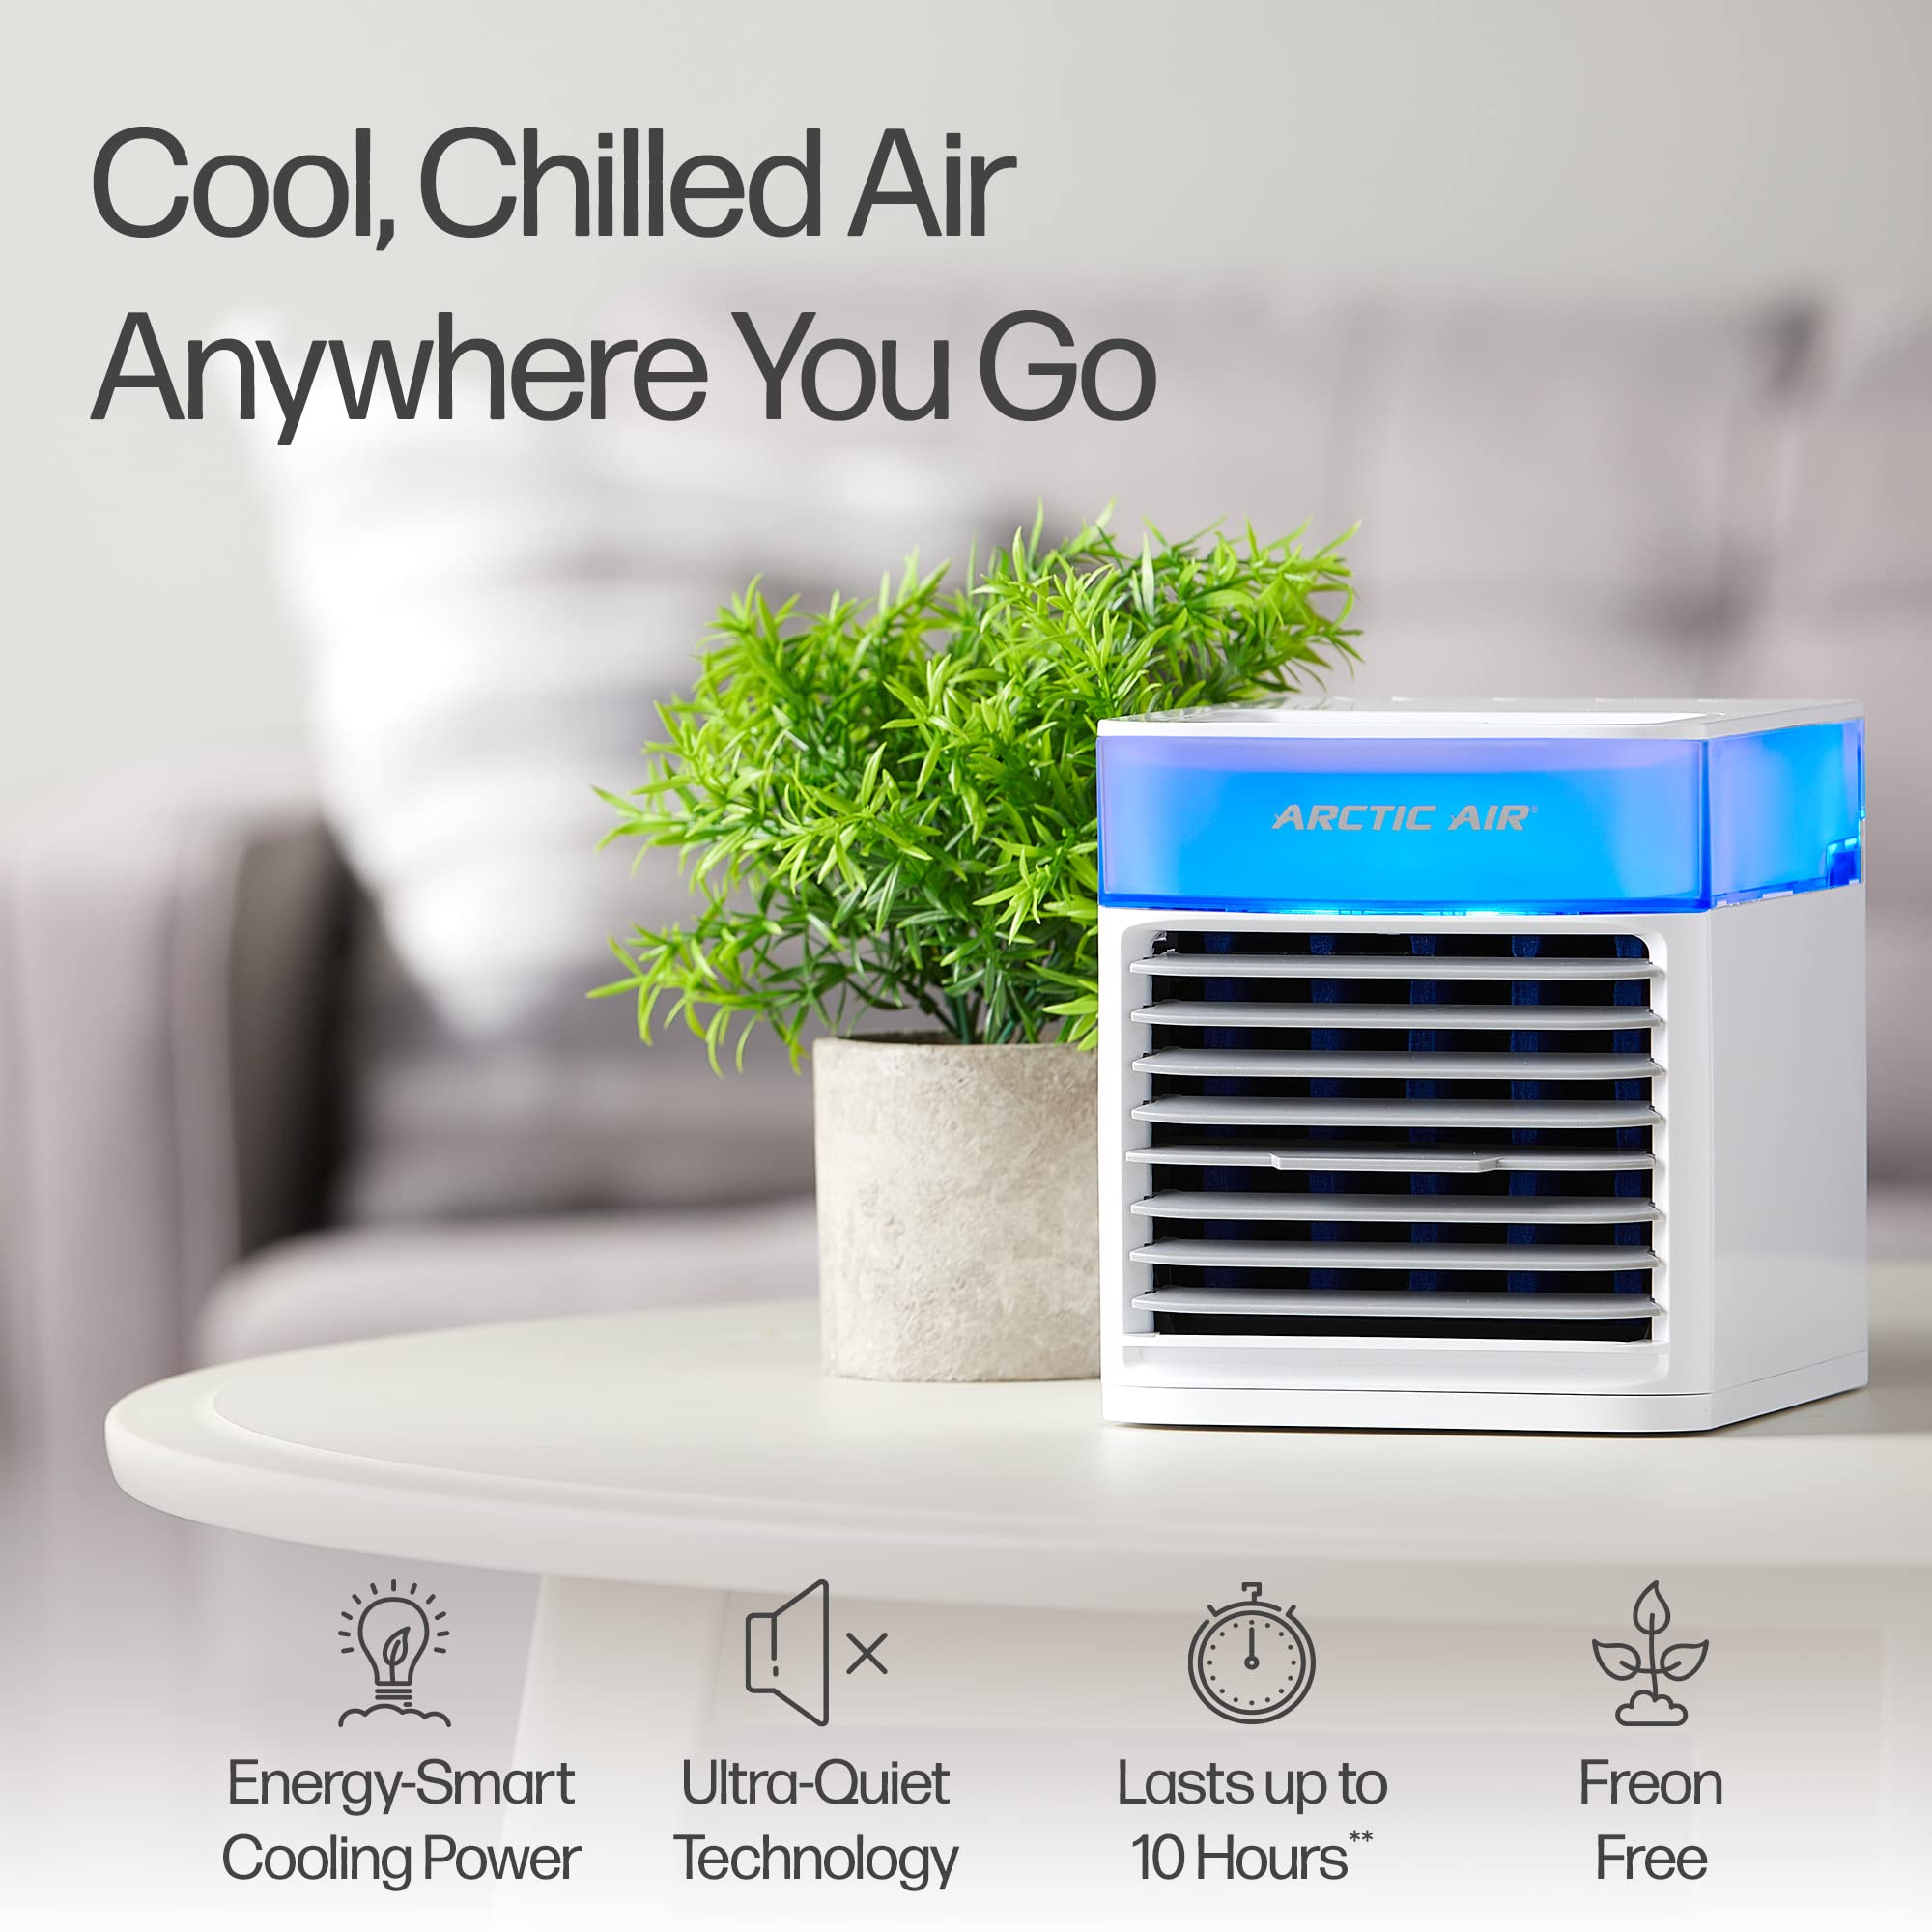 Arctic Air Pure Chill 2.0 Evaporative Air Cooler by Ontel - Powerful, Quiet, Lightweight and Portable Space Cooler with Hydro-Chill Technology For Bedroom, Office, Living Room & More,Blue